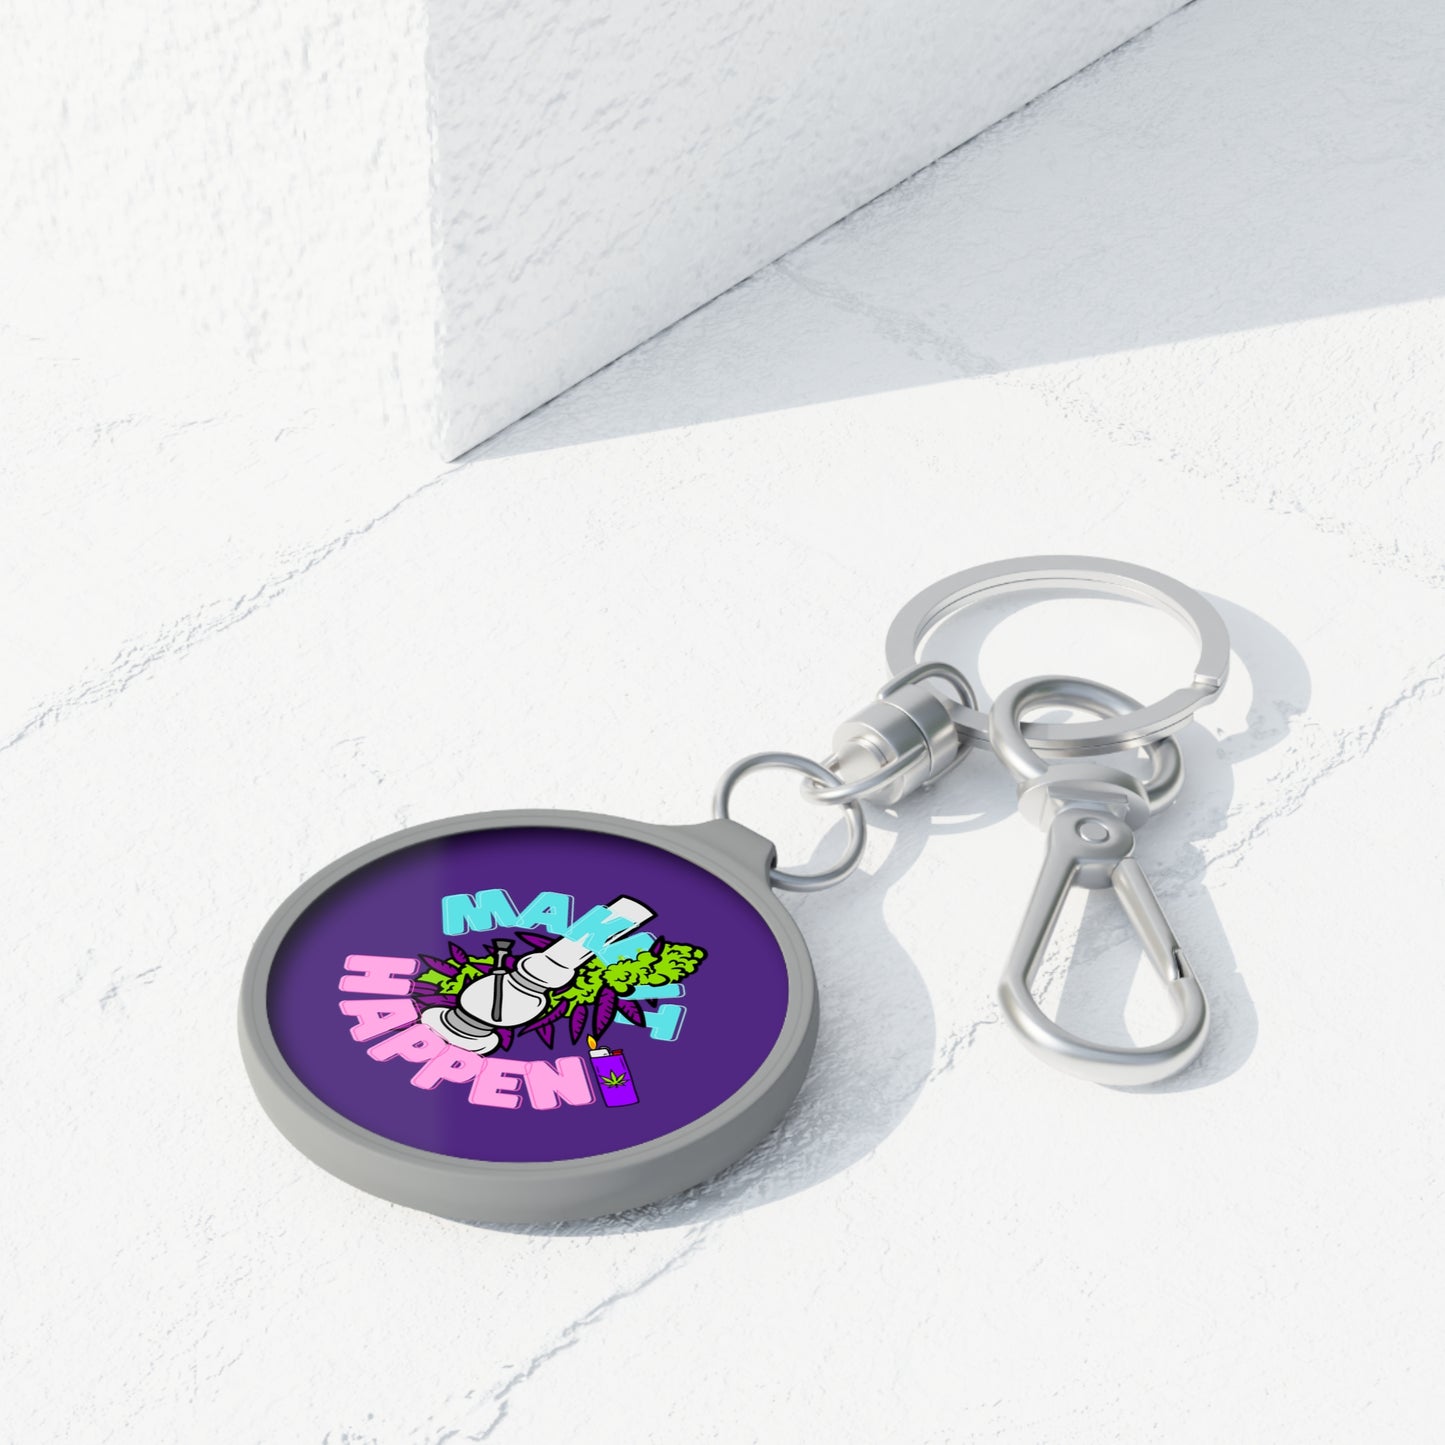 A Make It Happen Cannabis Keyring Tag with a cartoon graphic that reads "make it happen" placed on a white surface with angular shadows, featuring quality hardware fitting.